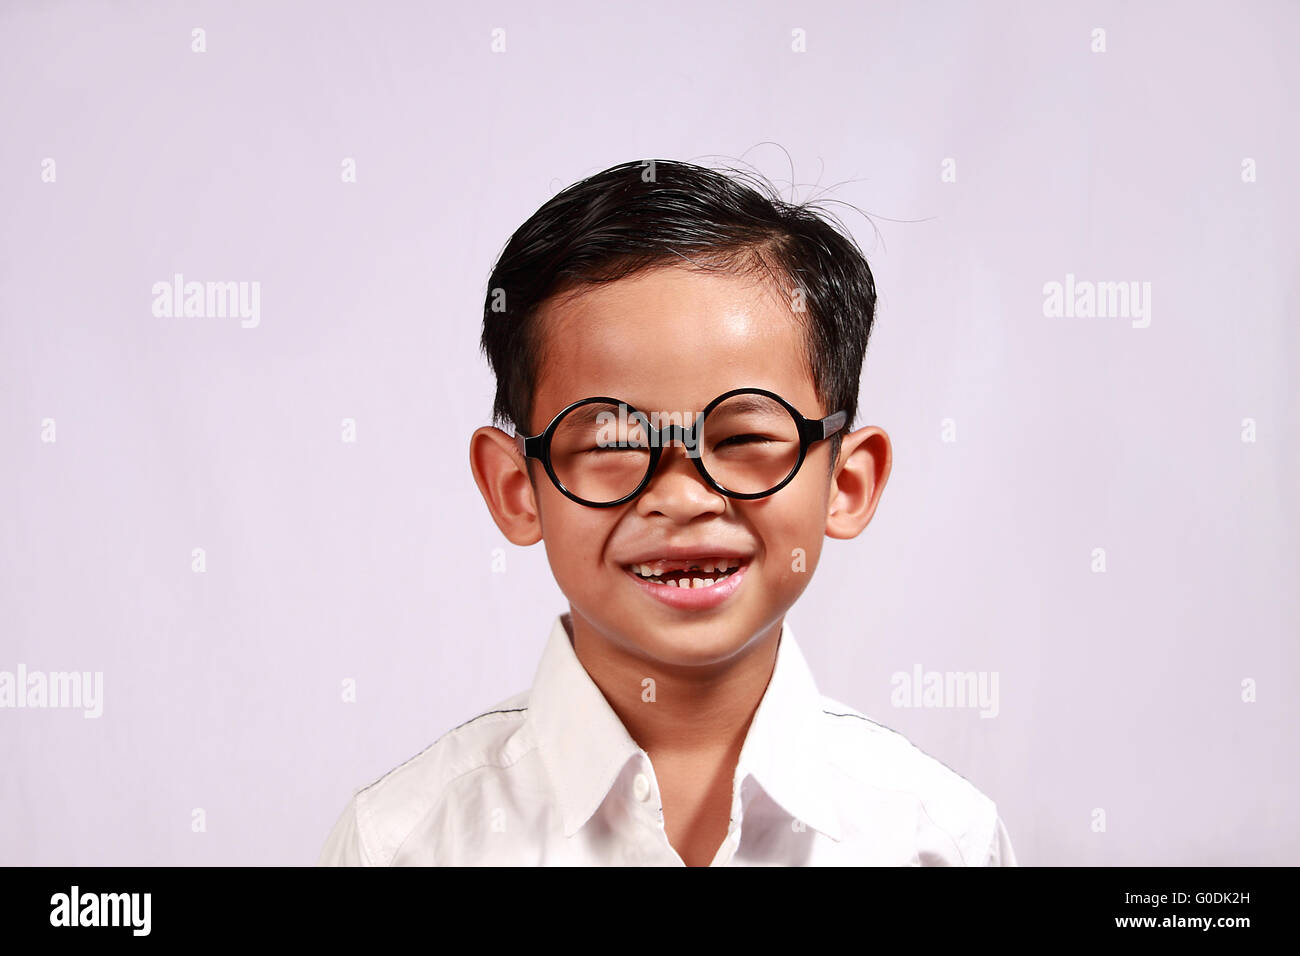 Portrait of young Asian boy with glasses showing his adorable smile Stock Photo